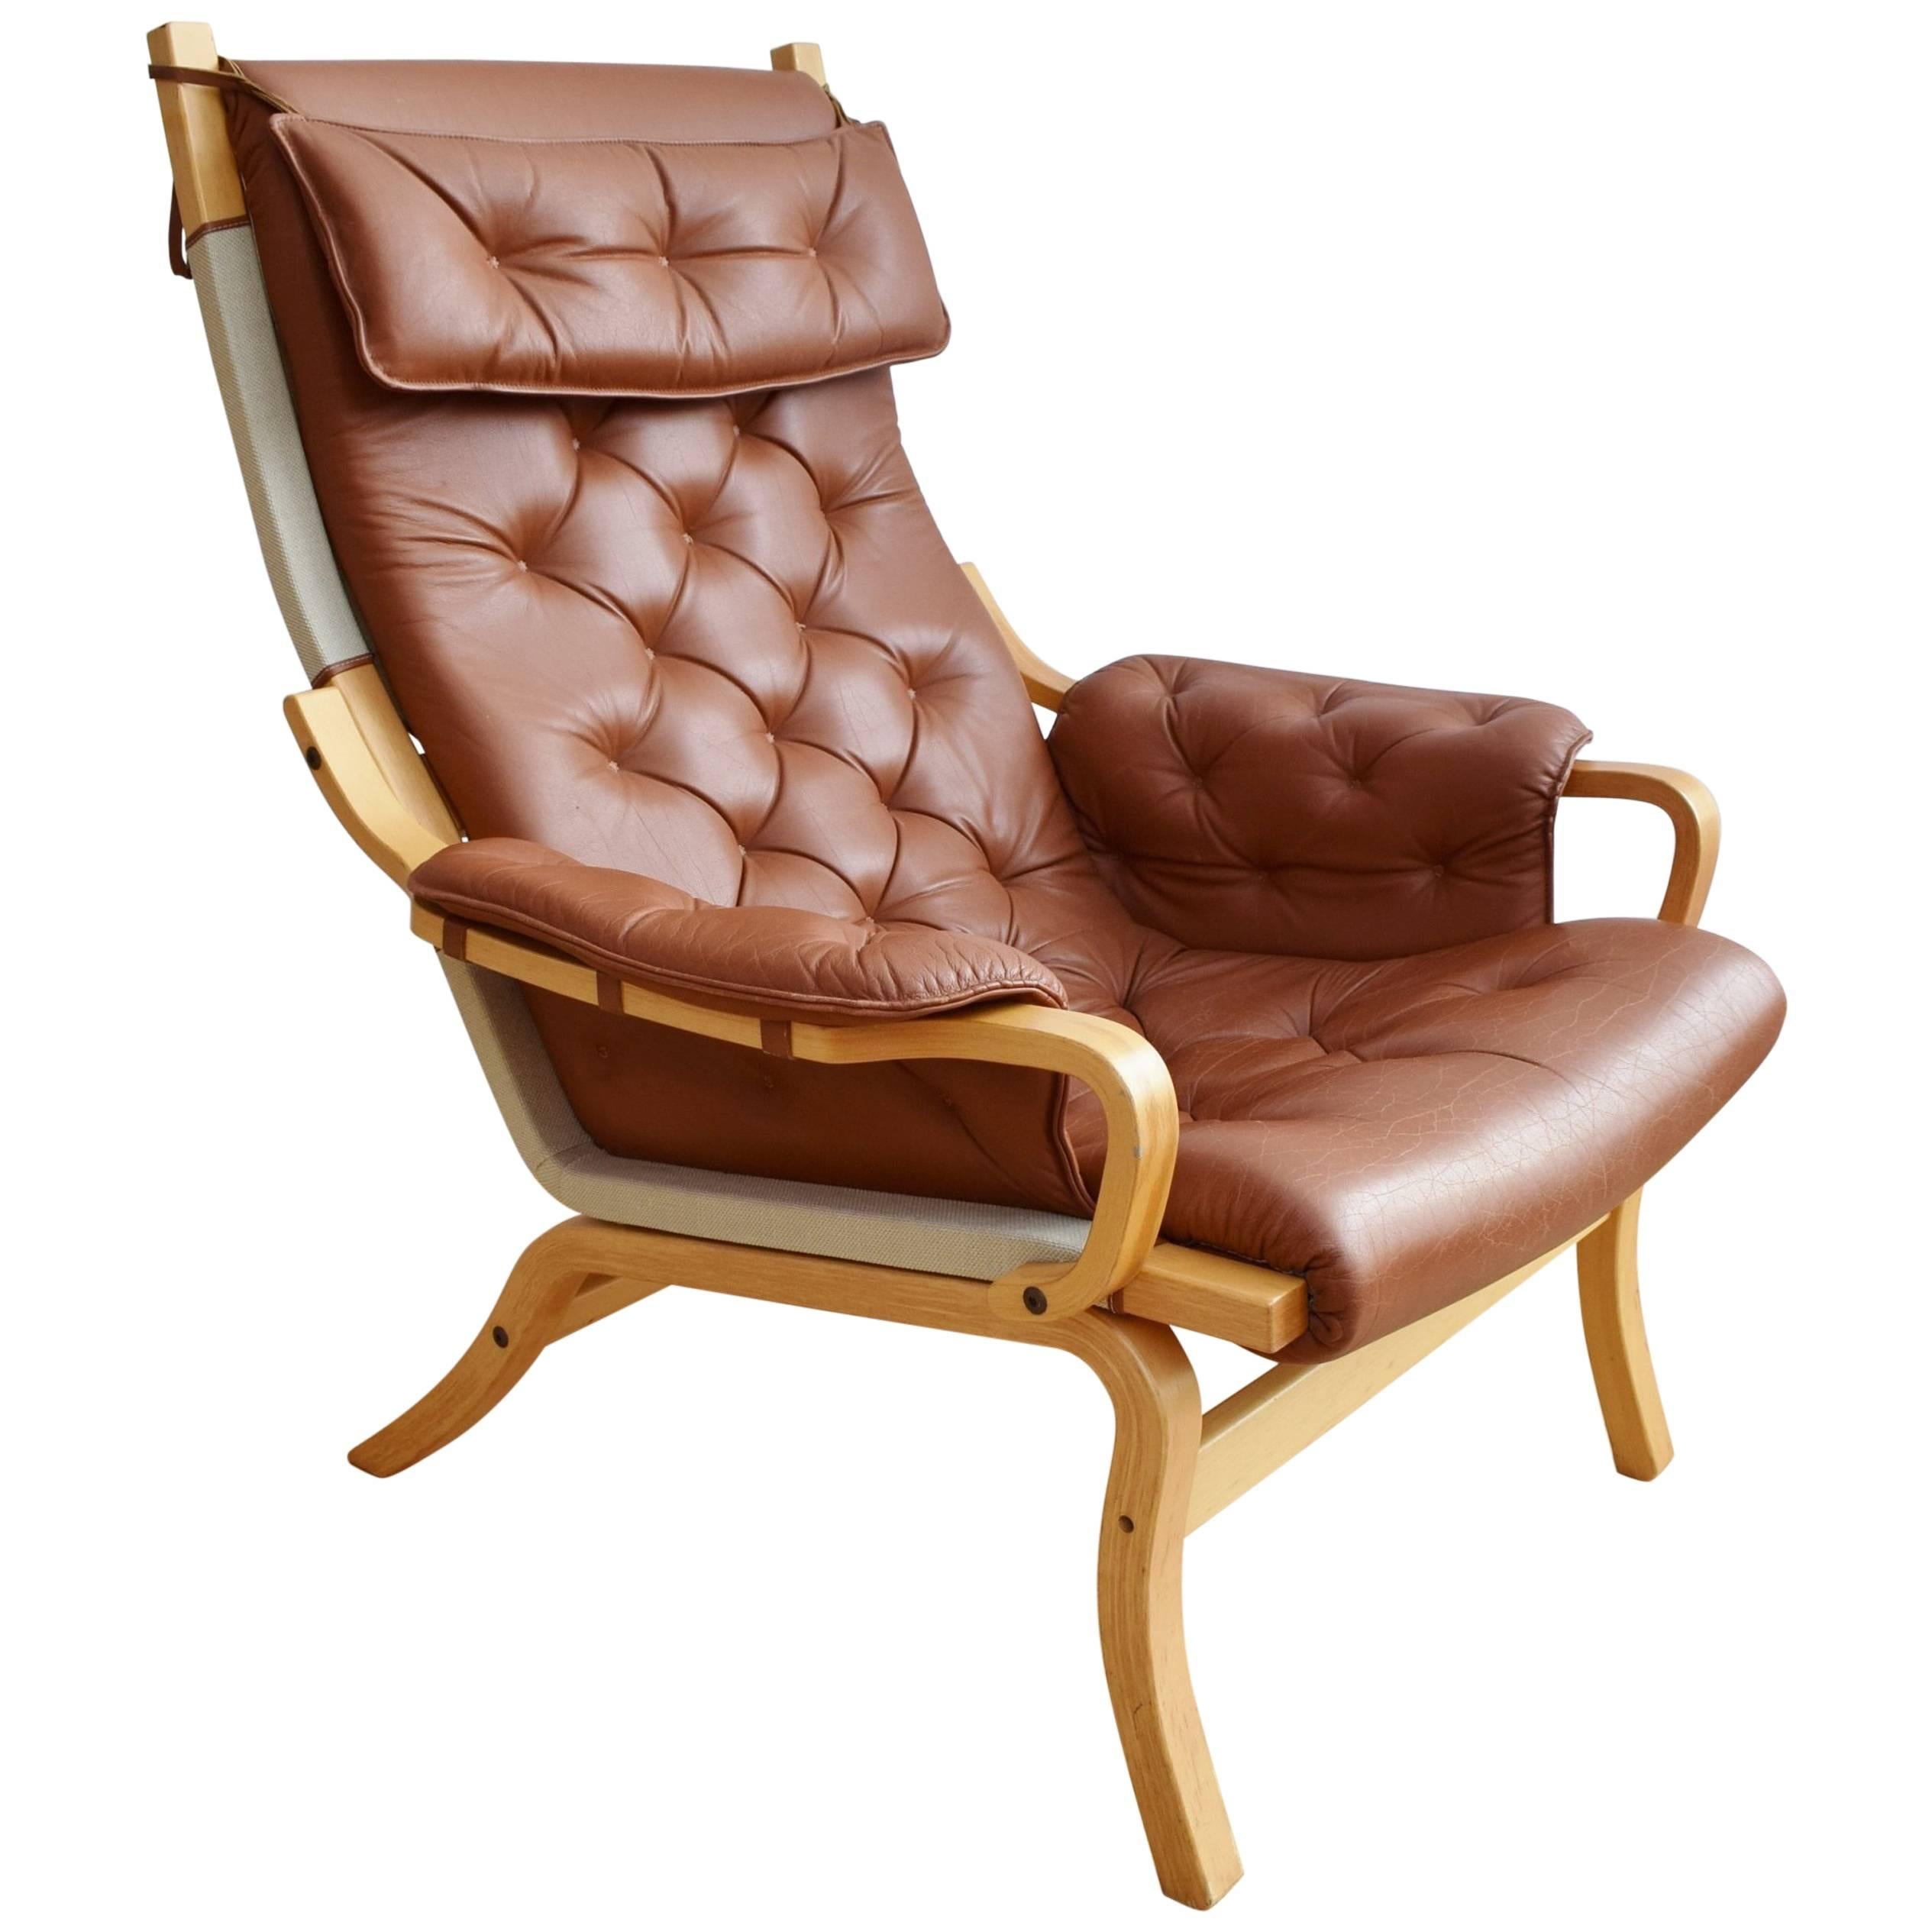 Vintage Danish Tan Leather Buttoned Bentwood and Canvas Armchair, 1960s For Sale